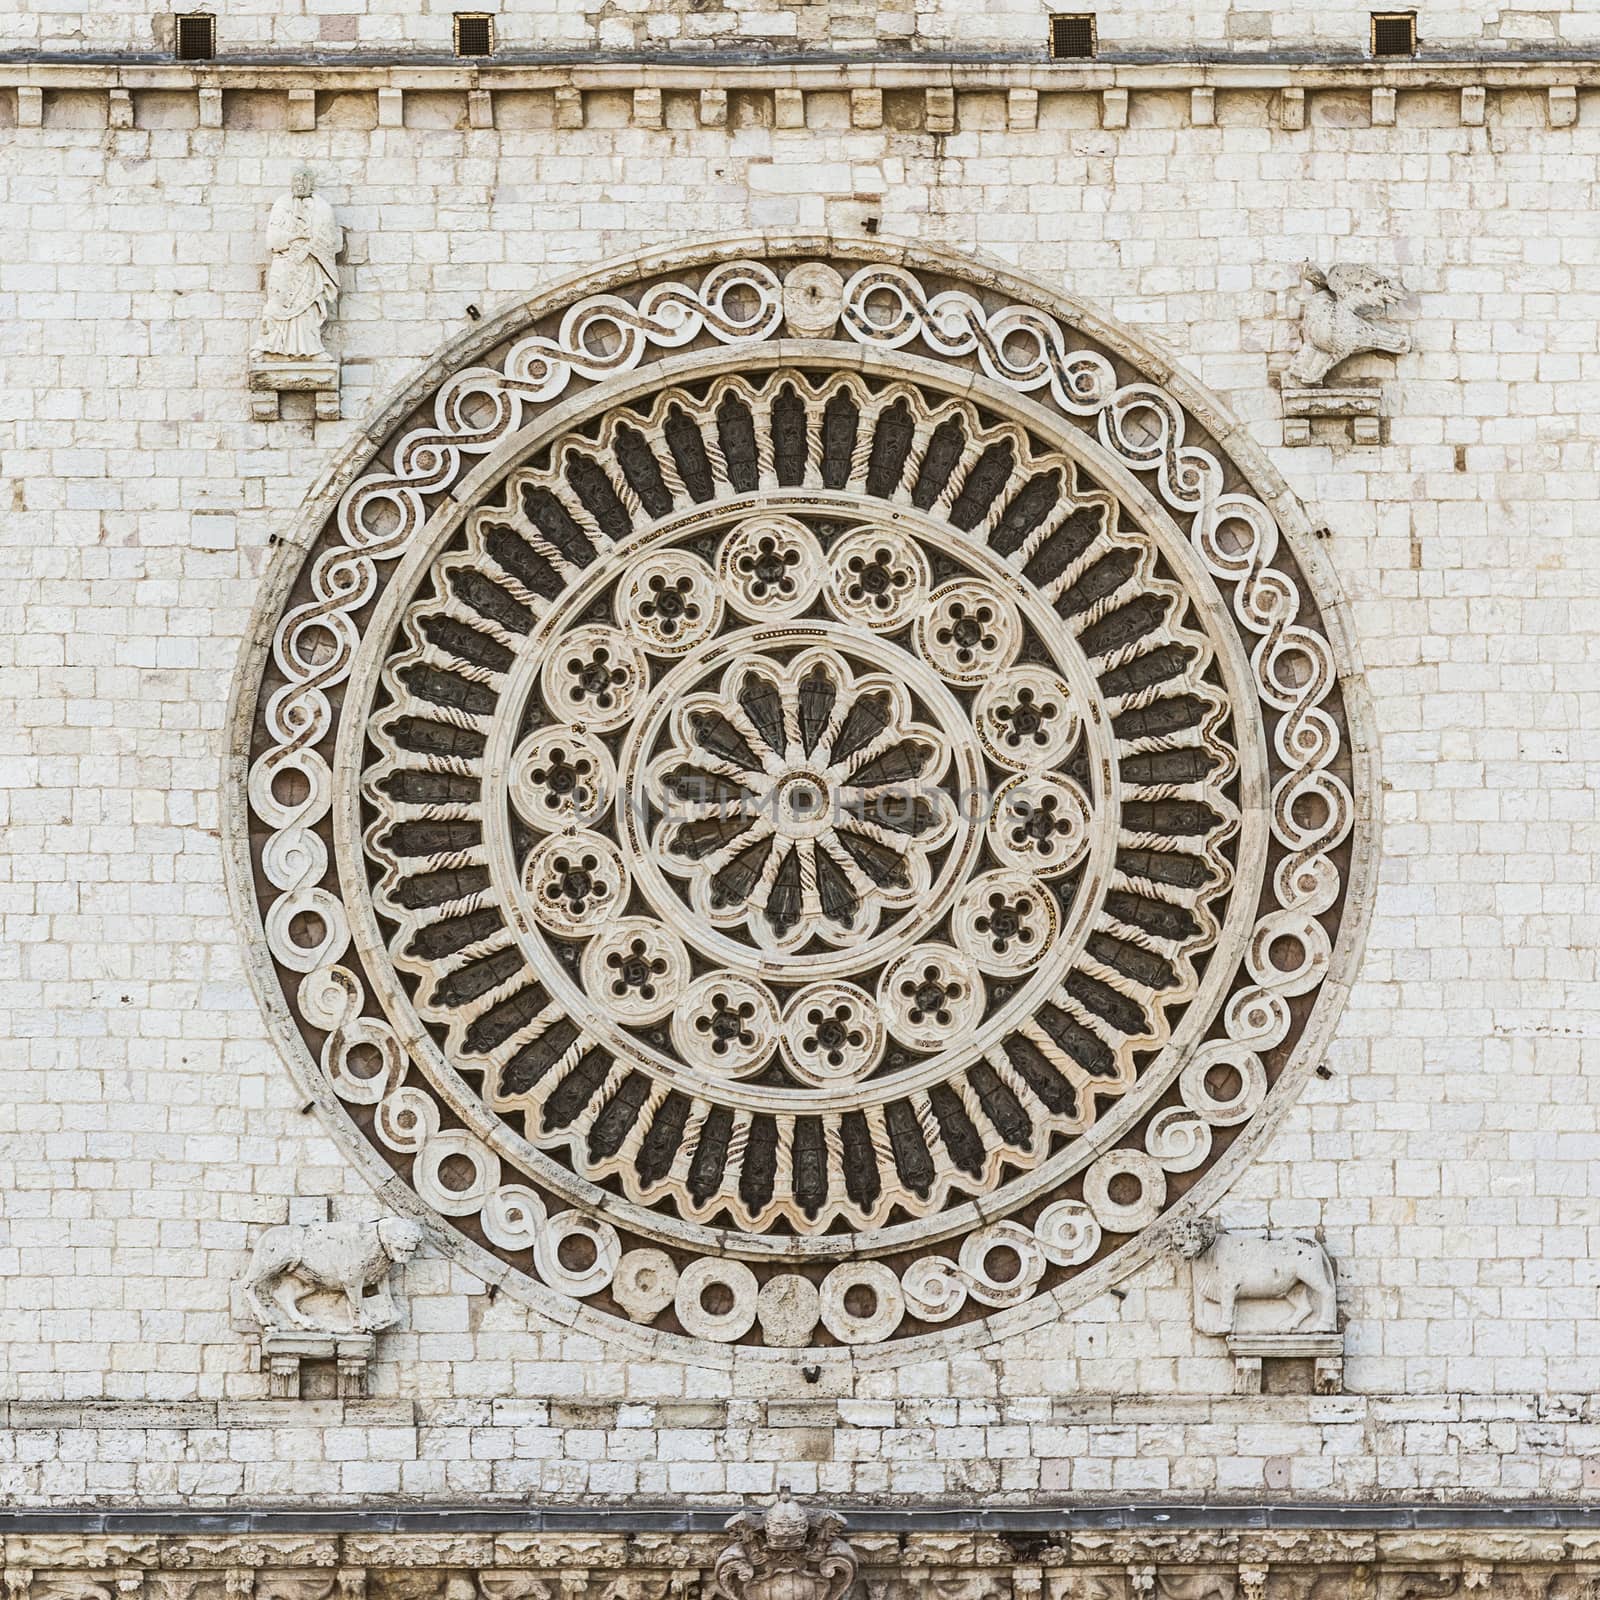 An image of the window rose from Assisi